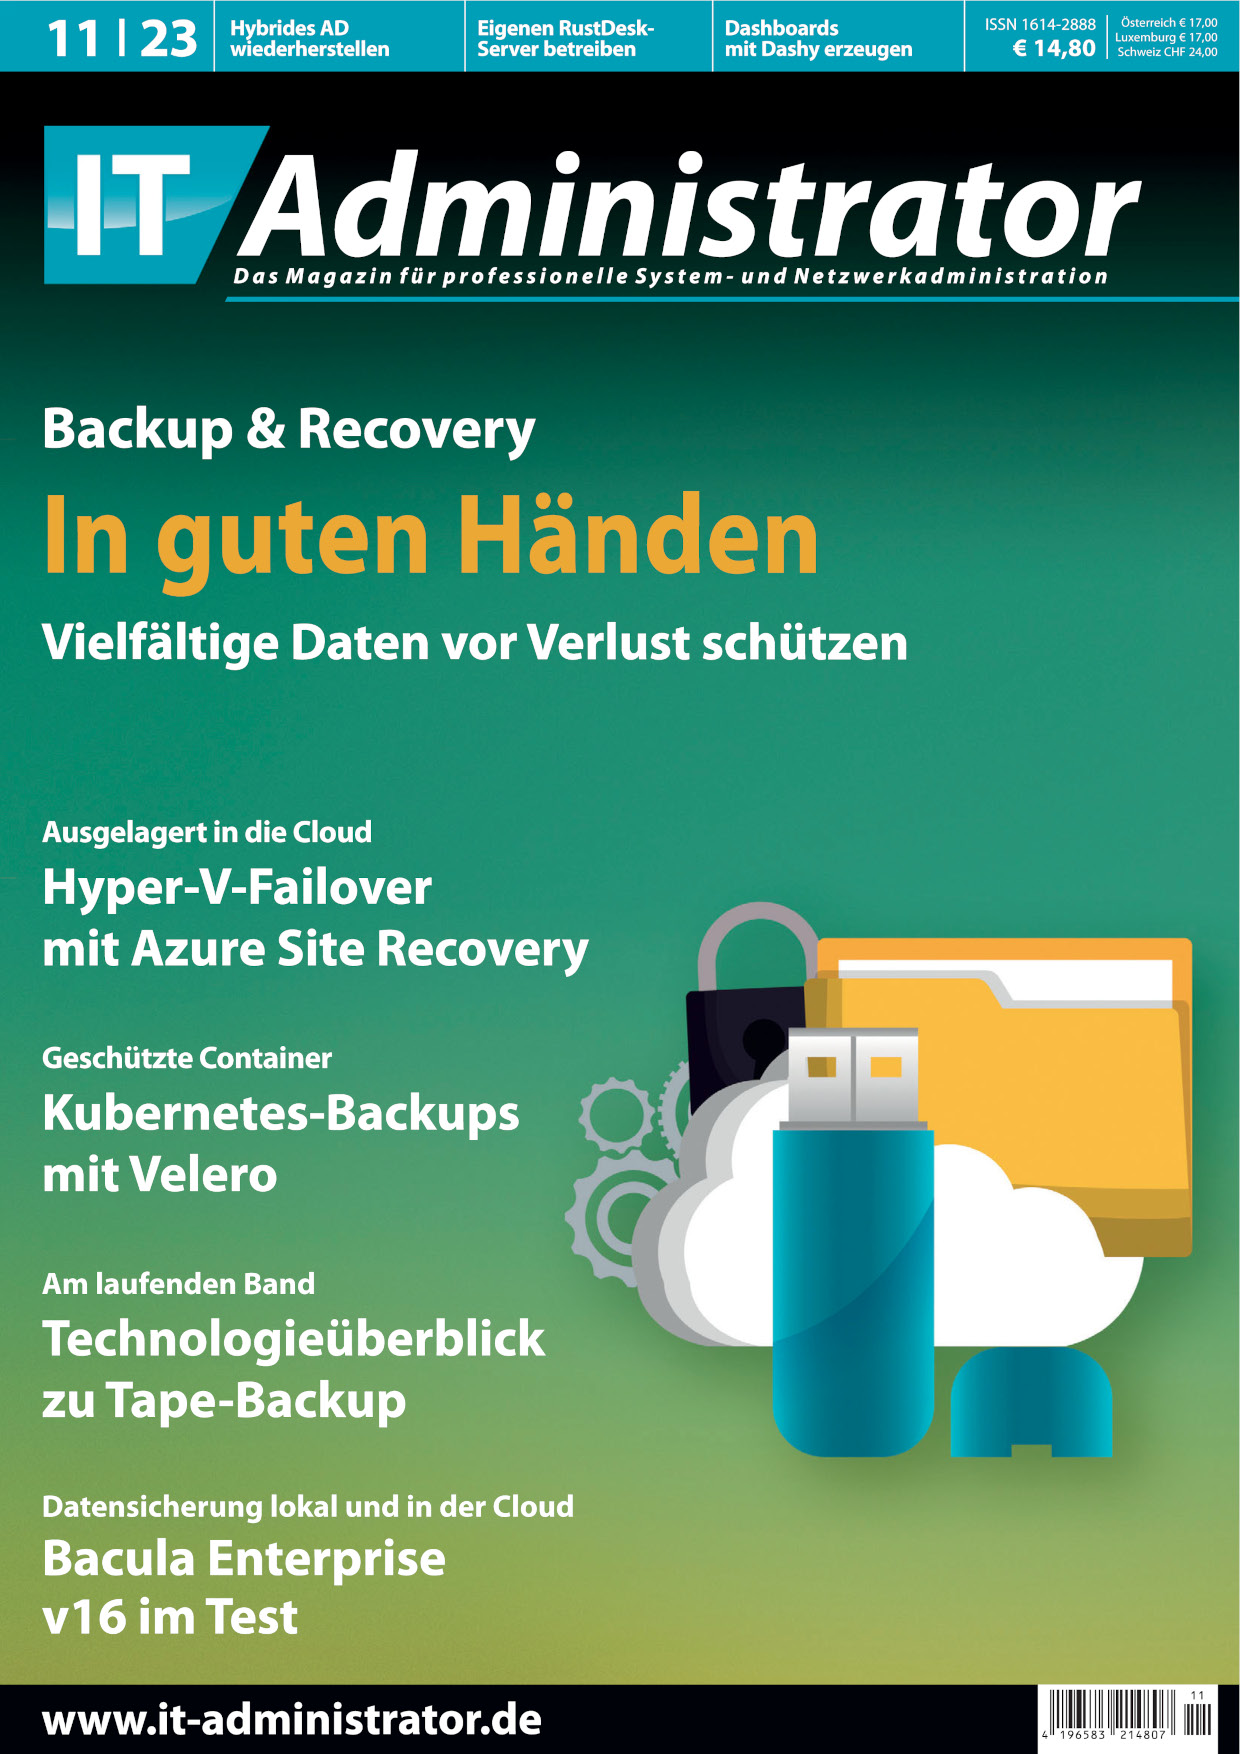 Backup und Recovery